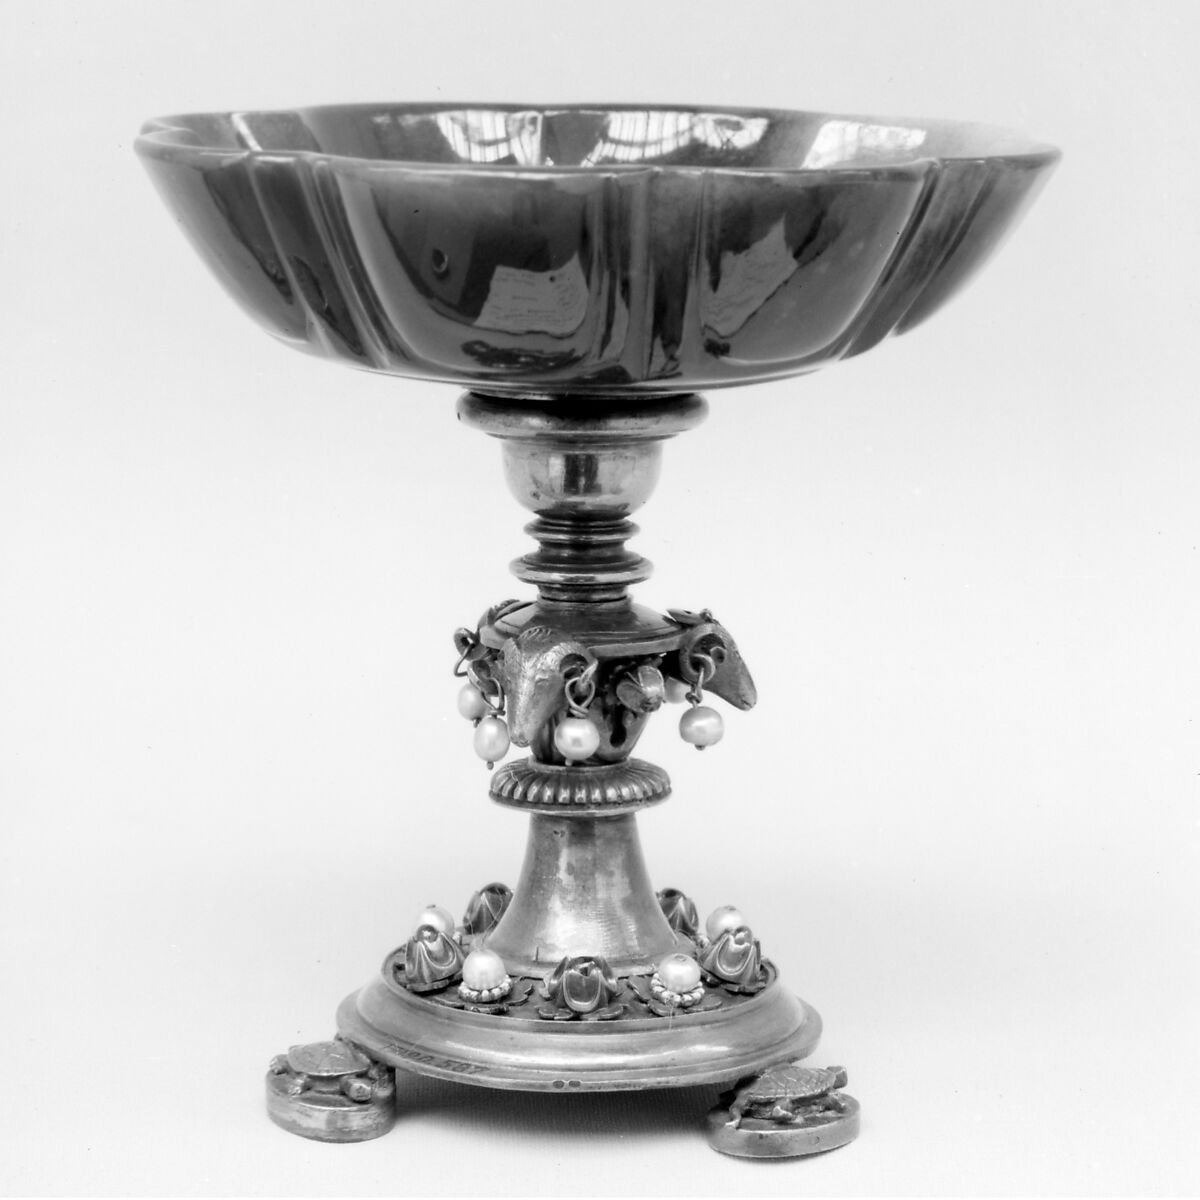 Cup, Silver-gilt, agate, jewels, possibly German 